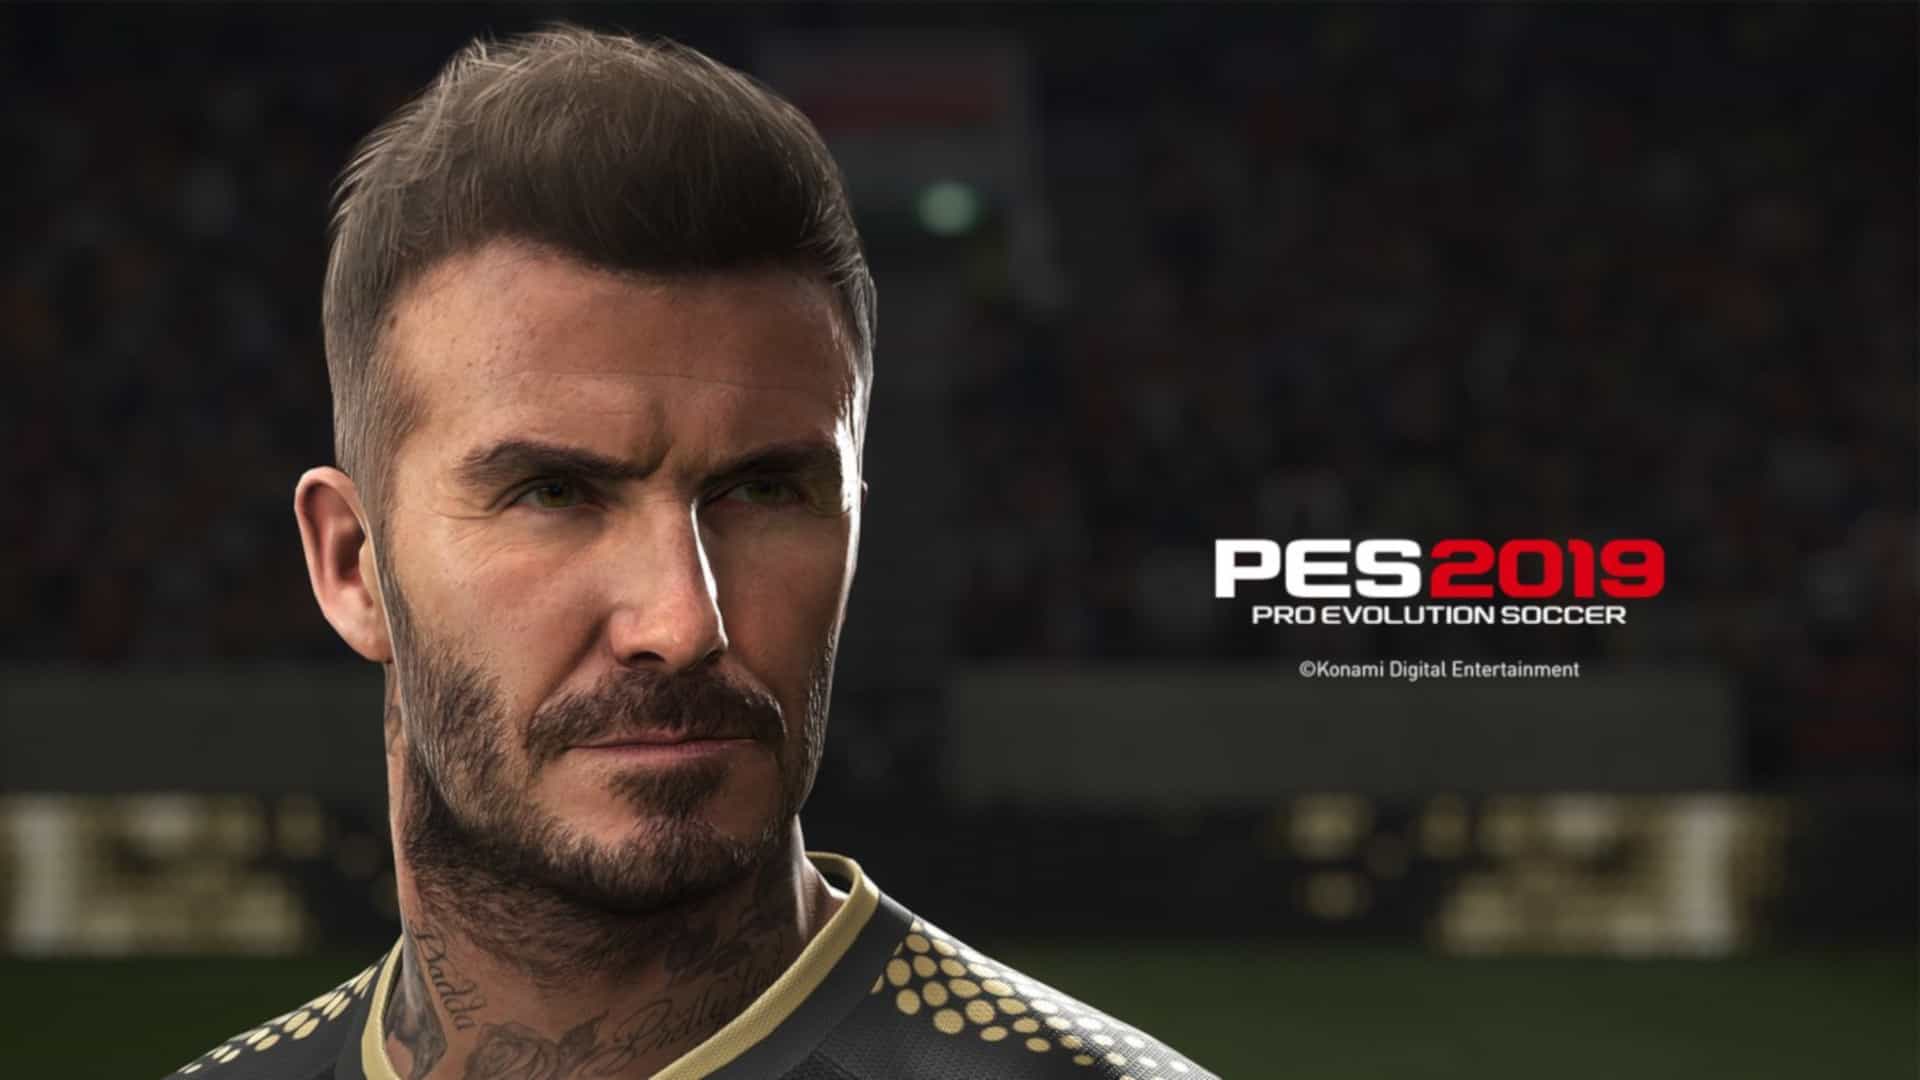 PES 2019 Release Date announced and more about teams revealed